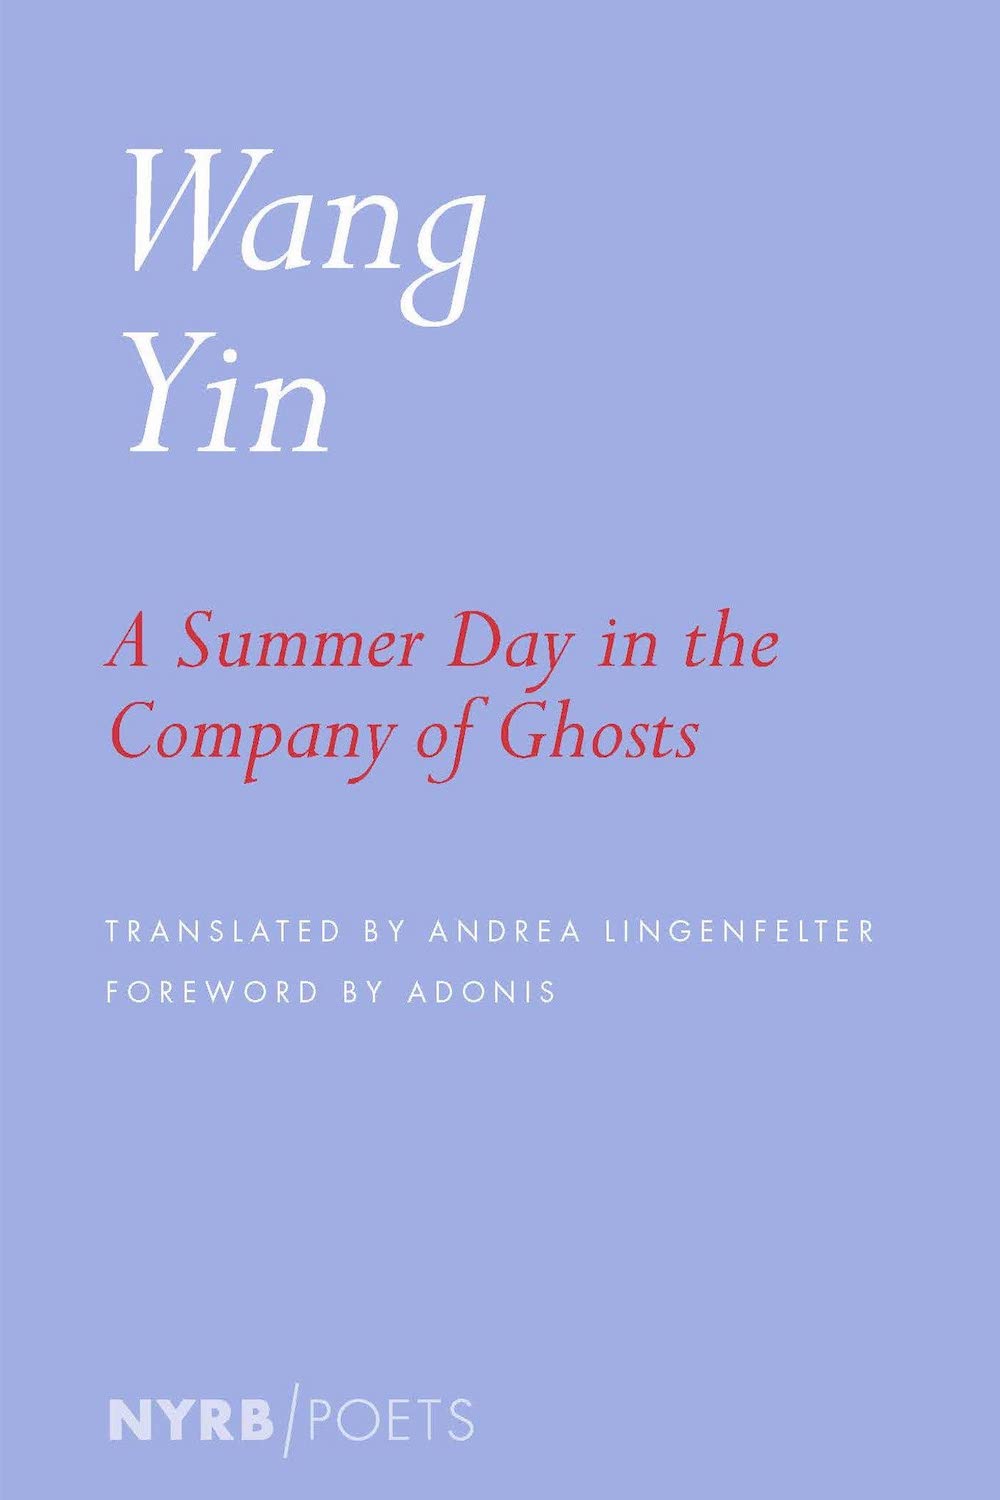 lilac book cover of wang yin summer day in the company of ghosts poetry collection